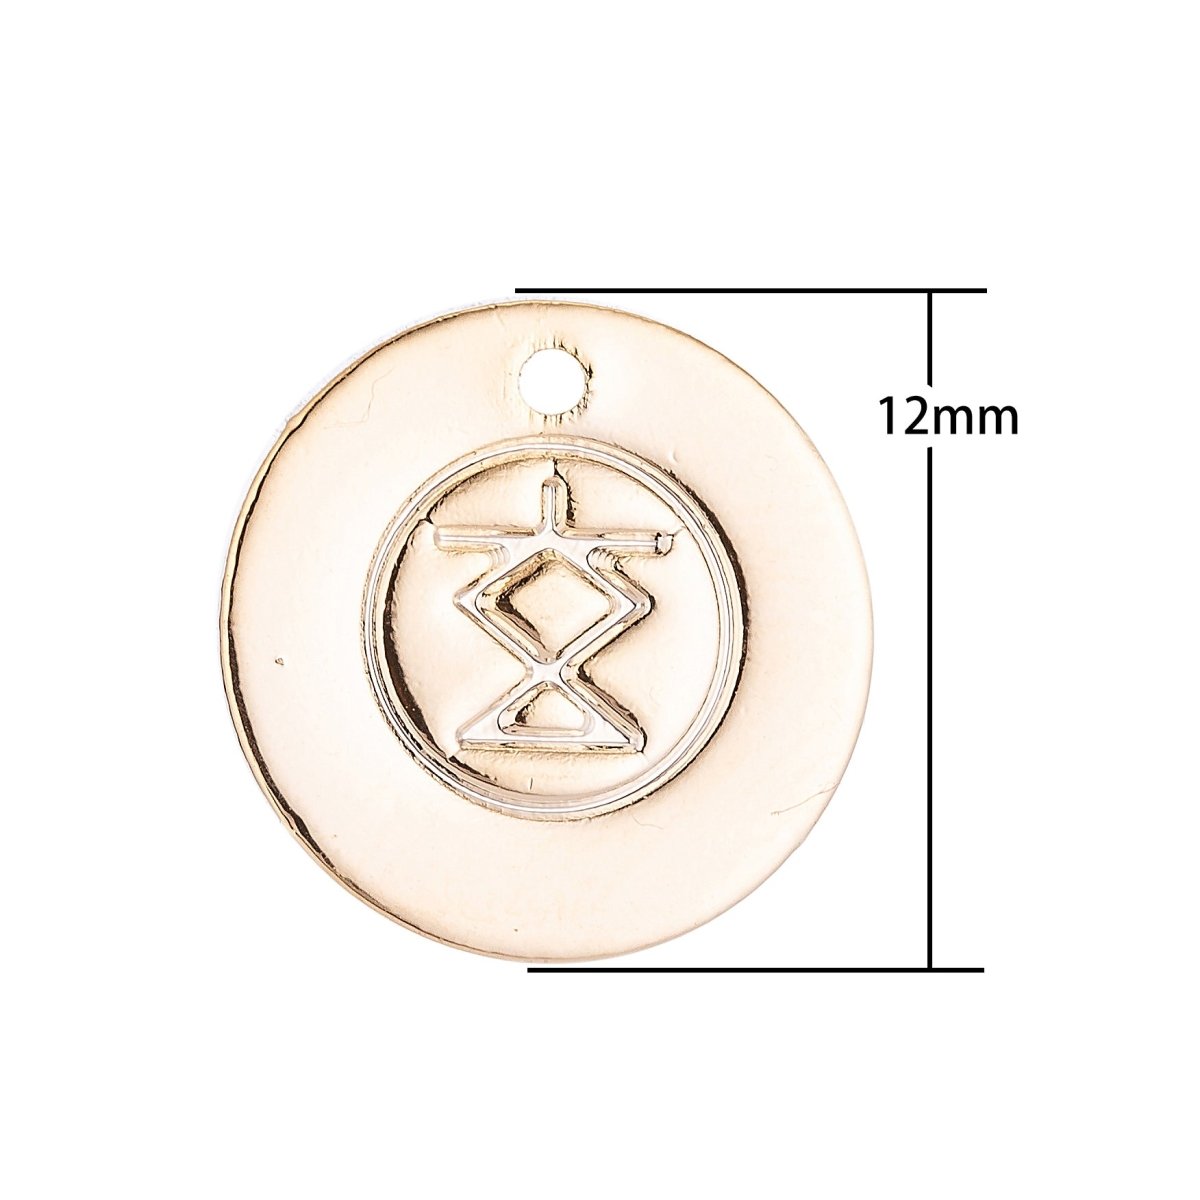 Dainty Aztec Coin 18k Gold Filled Charm Beadded Pendant for Bracelet Delicate Necklace Pendant Earring Gift for Jewelry Making DIY Supply C-061 - DLUXCA